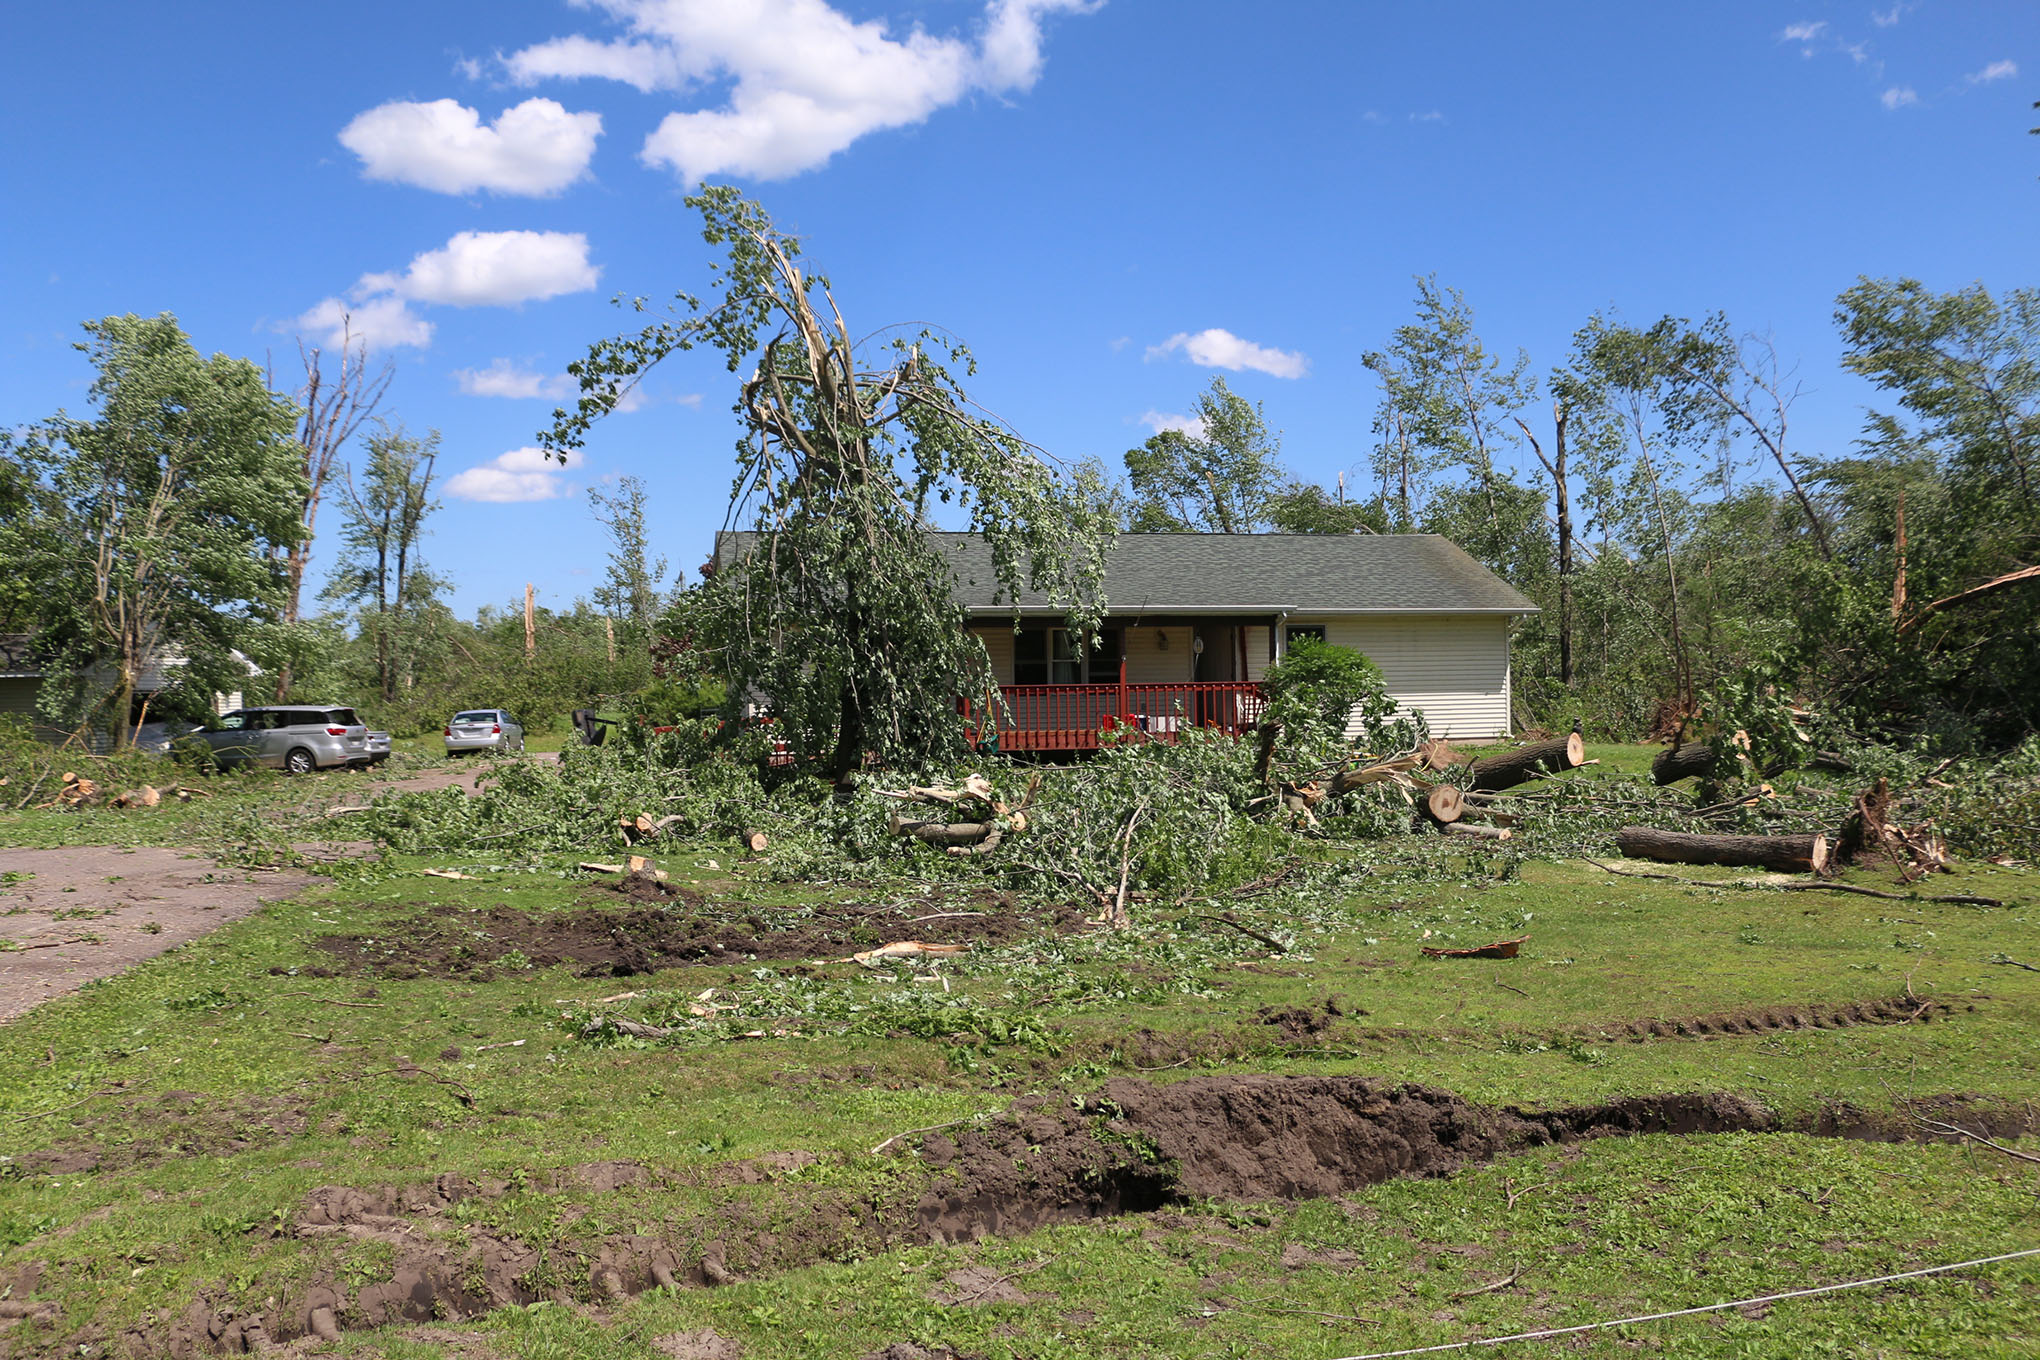 Tornado damage including downed trees at Elissa Smith's home.